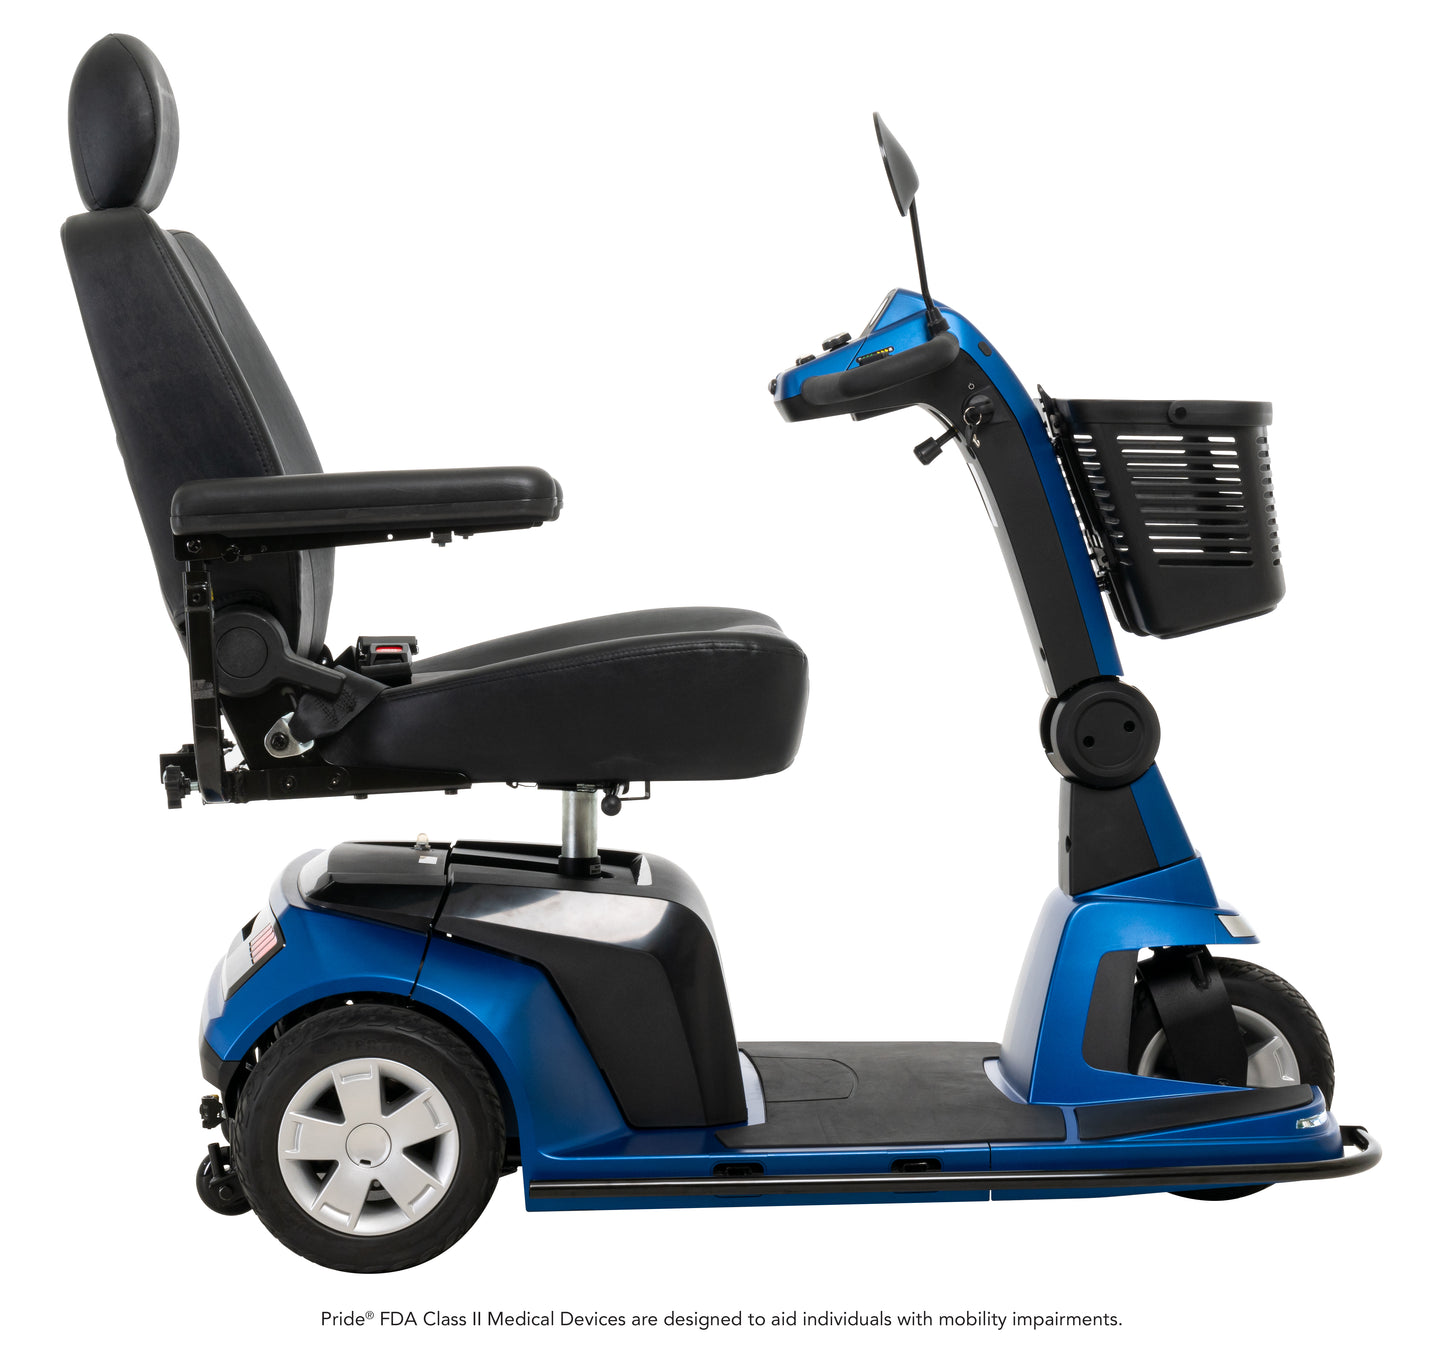 Maxima 3 Wheel SC901 Mobility Scooter